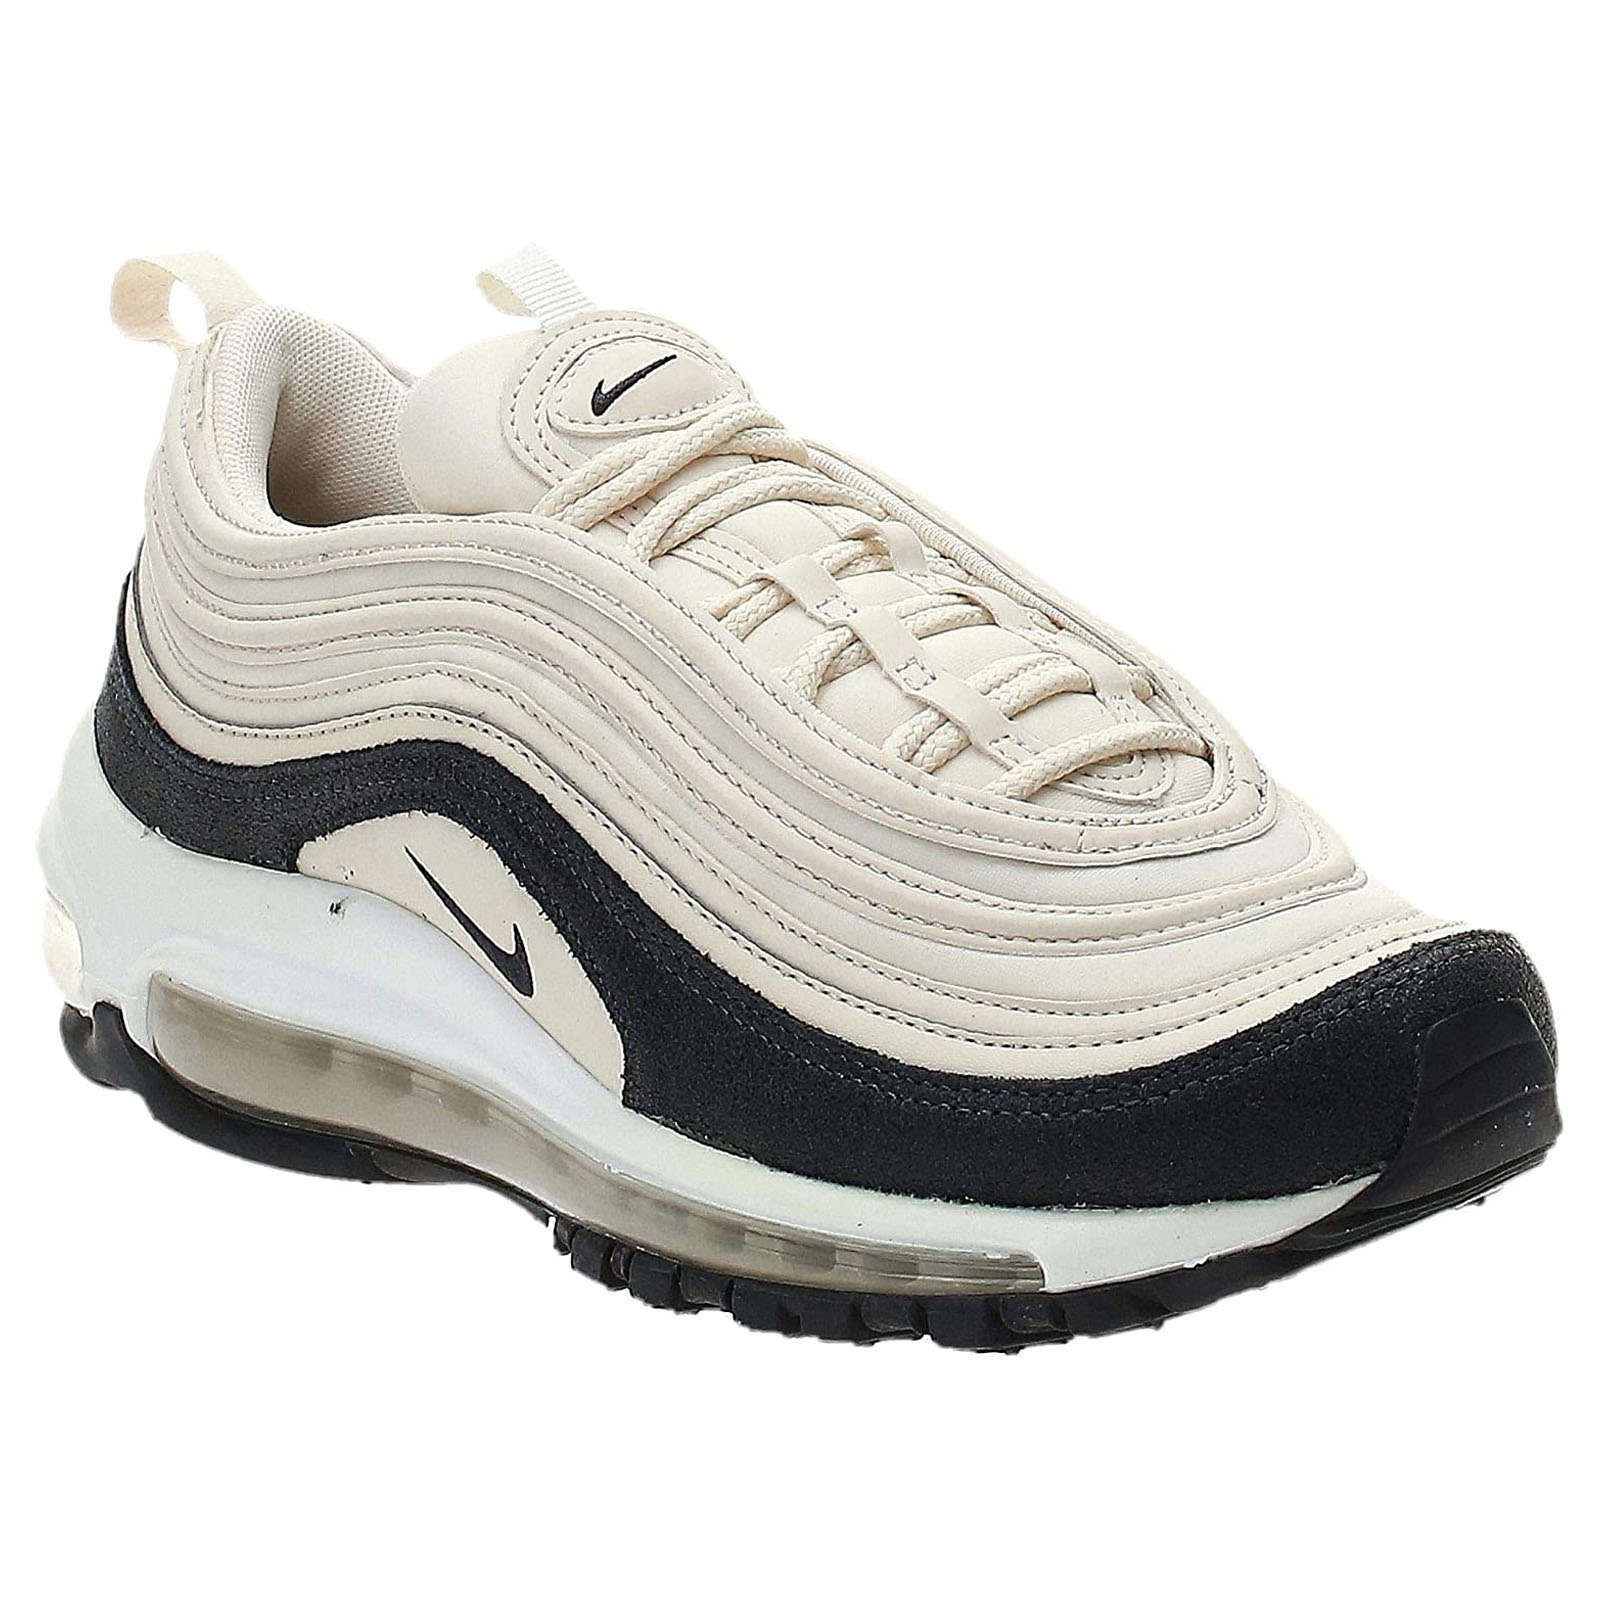 Nike Air Max 97 PRM Textile Leather Synthetic Women's Low-Top Sneakers#color_light cream oil grey